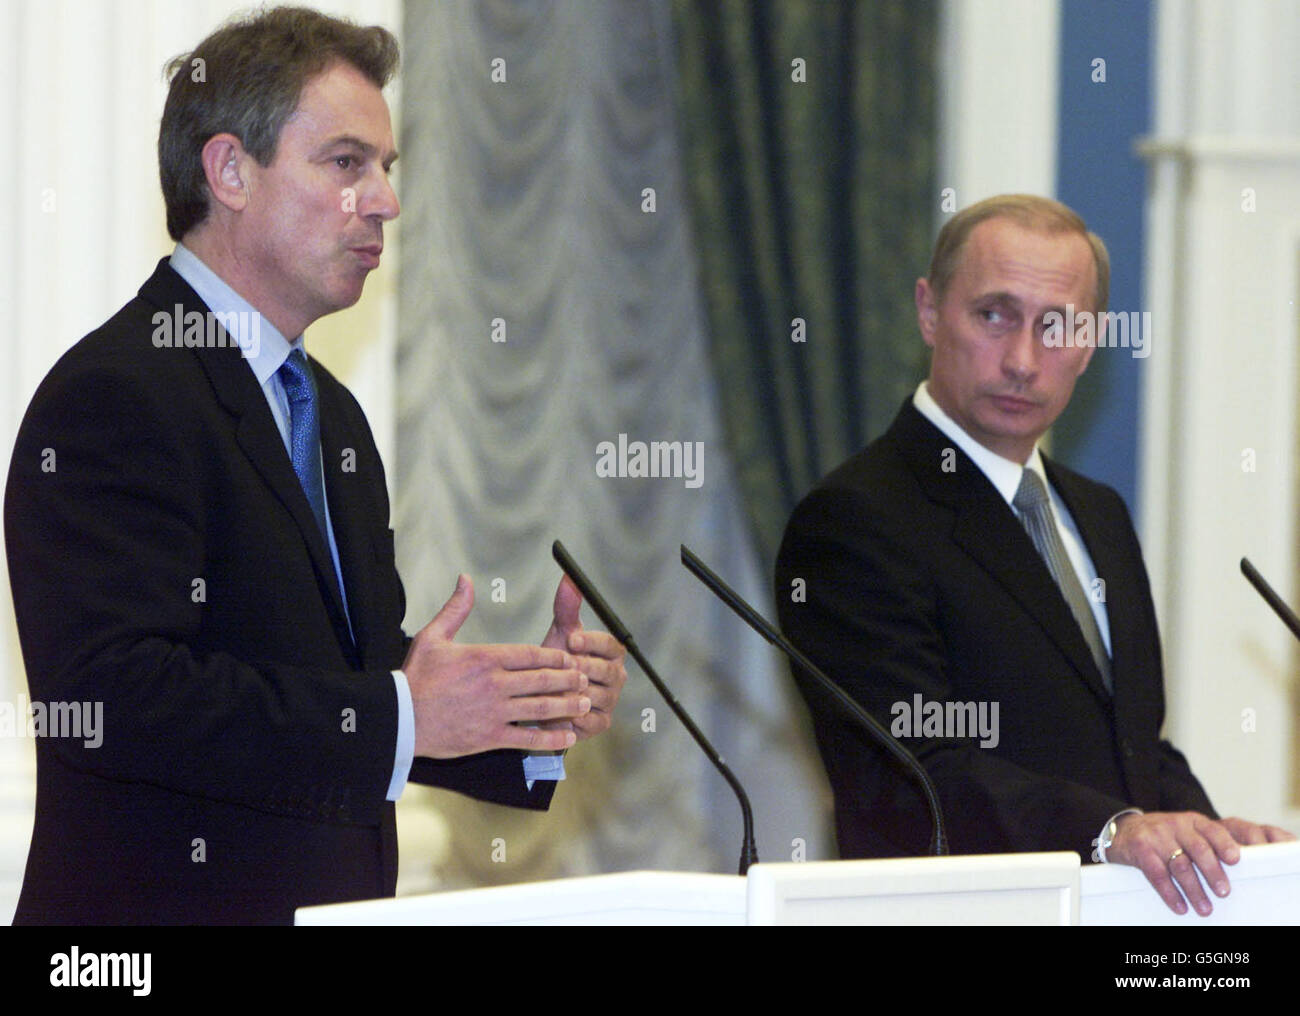 Britain's Prime Minister Tony Blair (left) holds a press conference with Russian President Vladimir Putin at the Kremlin. Mr Blair's visit to Russia and meeting with Russian president Vladimir Putin is part of the coalition building process. * ... to identify those responsible for the attacks on the U.S. on September 11th. Blair and Putin are expected to discuss the evidence paper on prime suspect Osama bin Laden as well as the humanitarian efforts to be undertaken to help refugees. Stock Photo